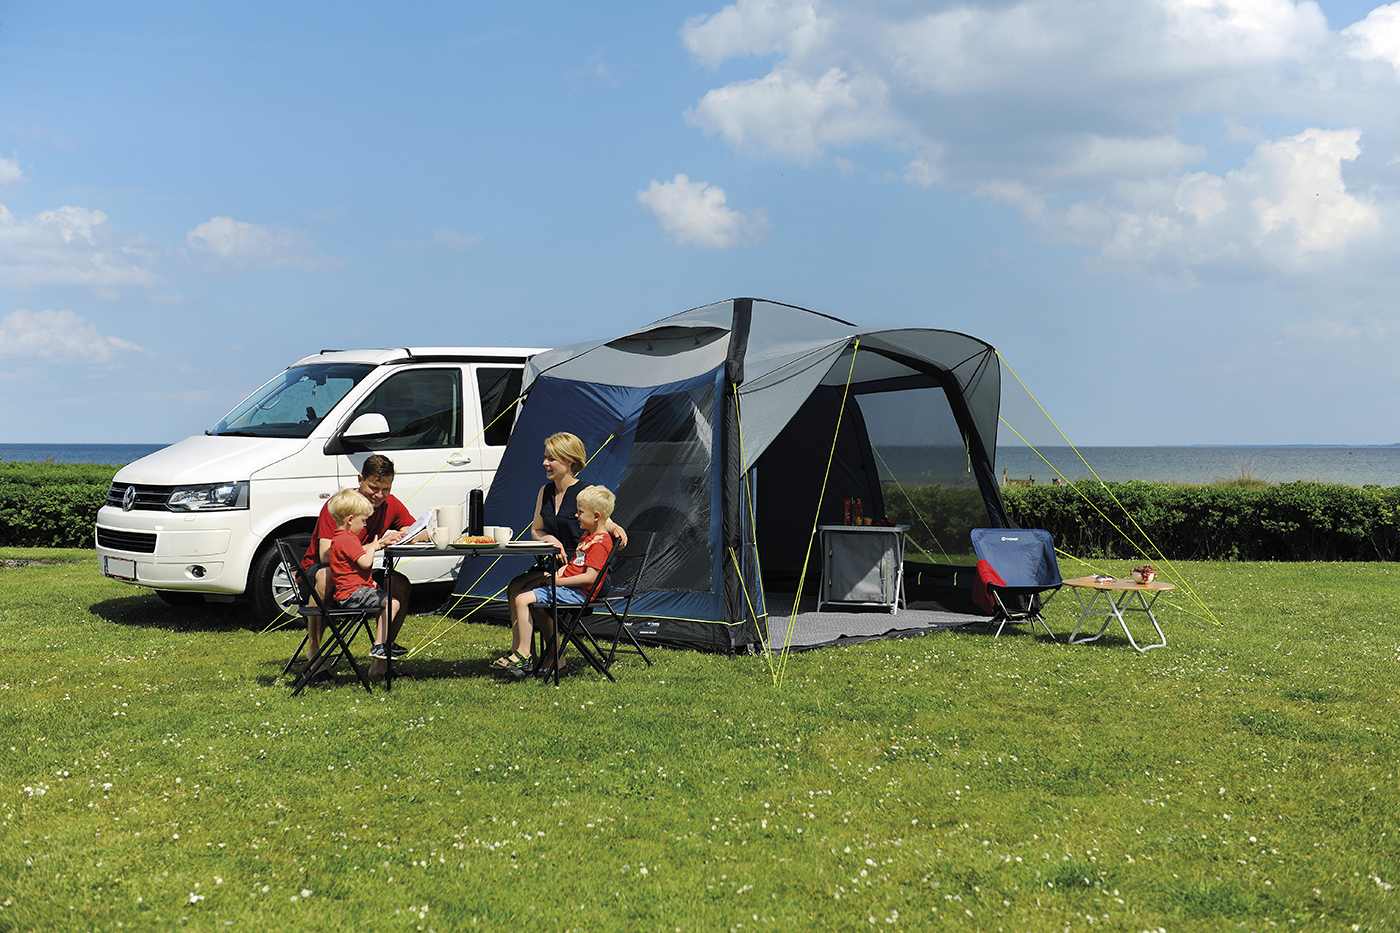 Motorhome awnings and people sat in field